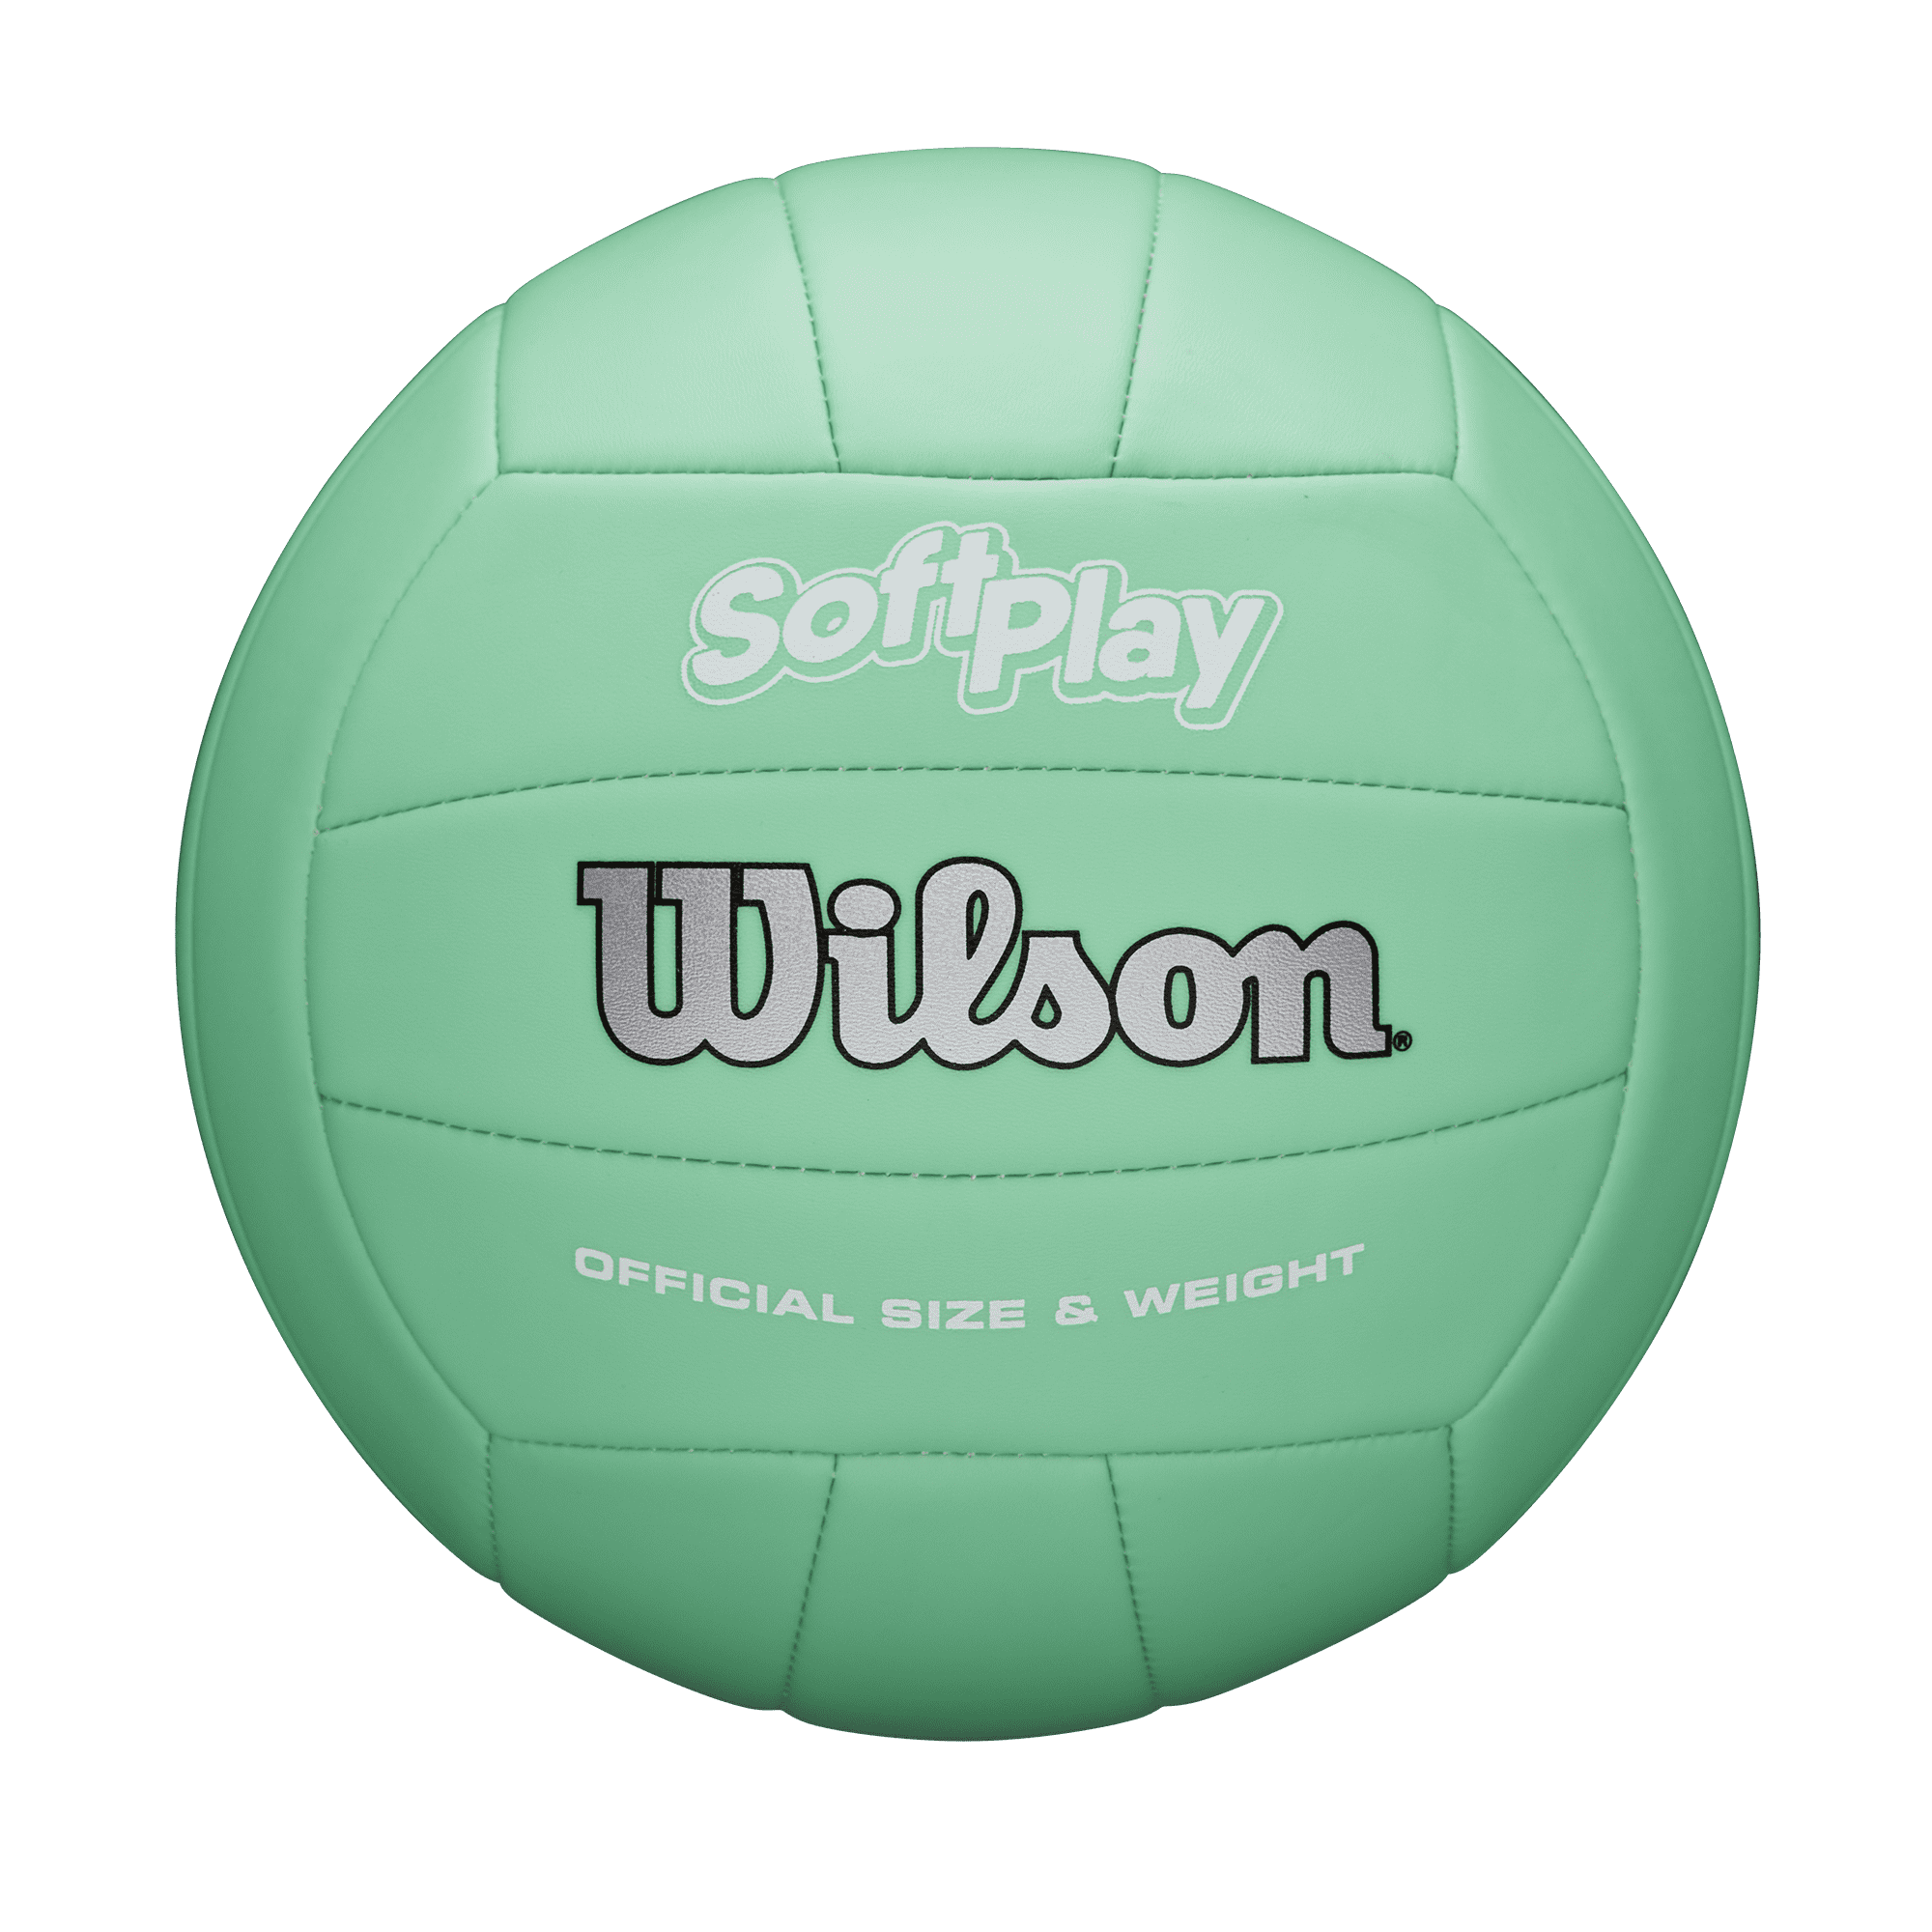 Molten Volleyball Ball Size 5 V5M5000 PU Leather Soft Touch Indoor Outdoor Game 